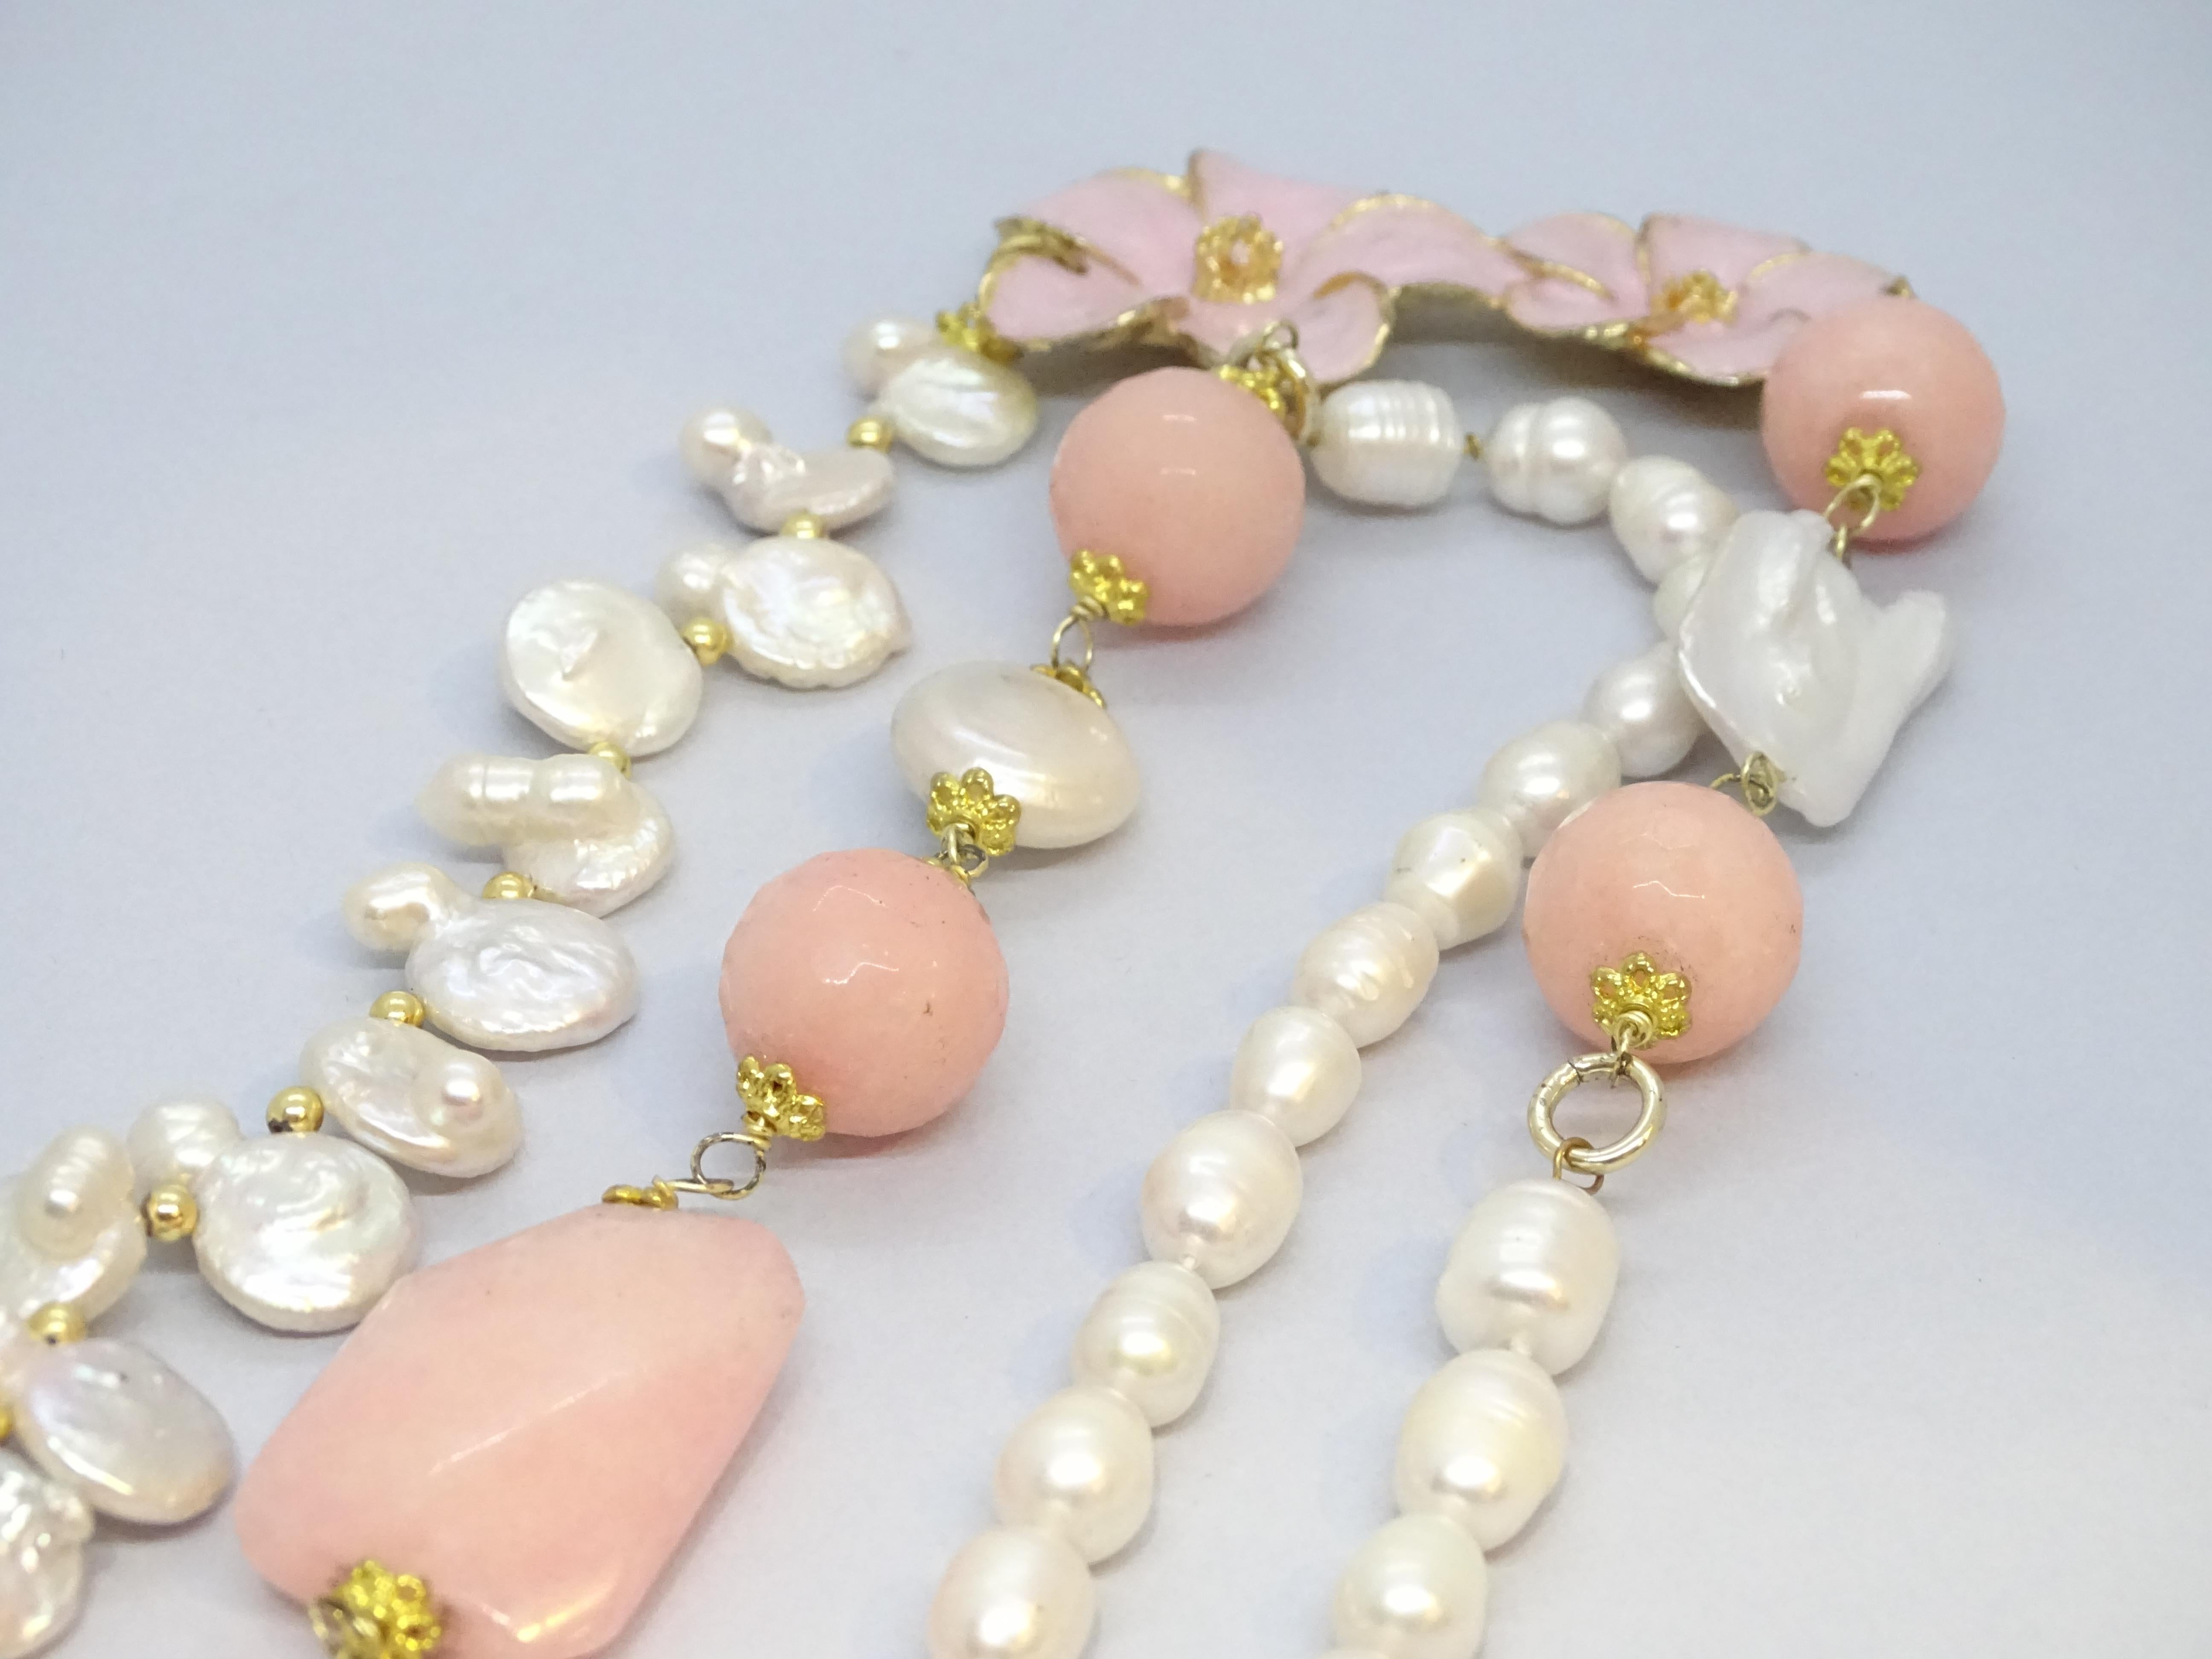 Italian necklace with baroque pearls, rose quartz and enamel For Sale 4